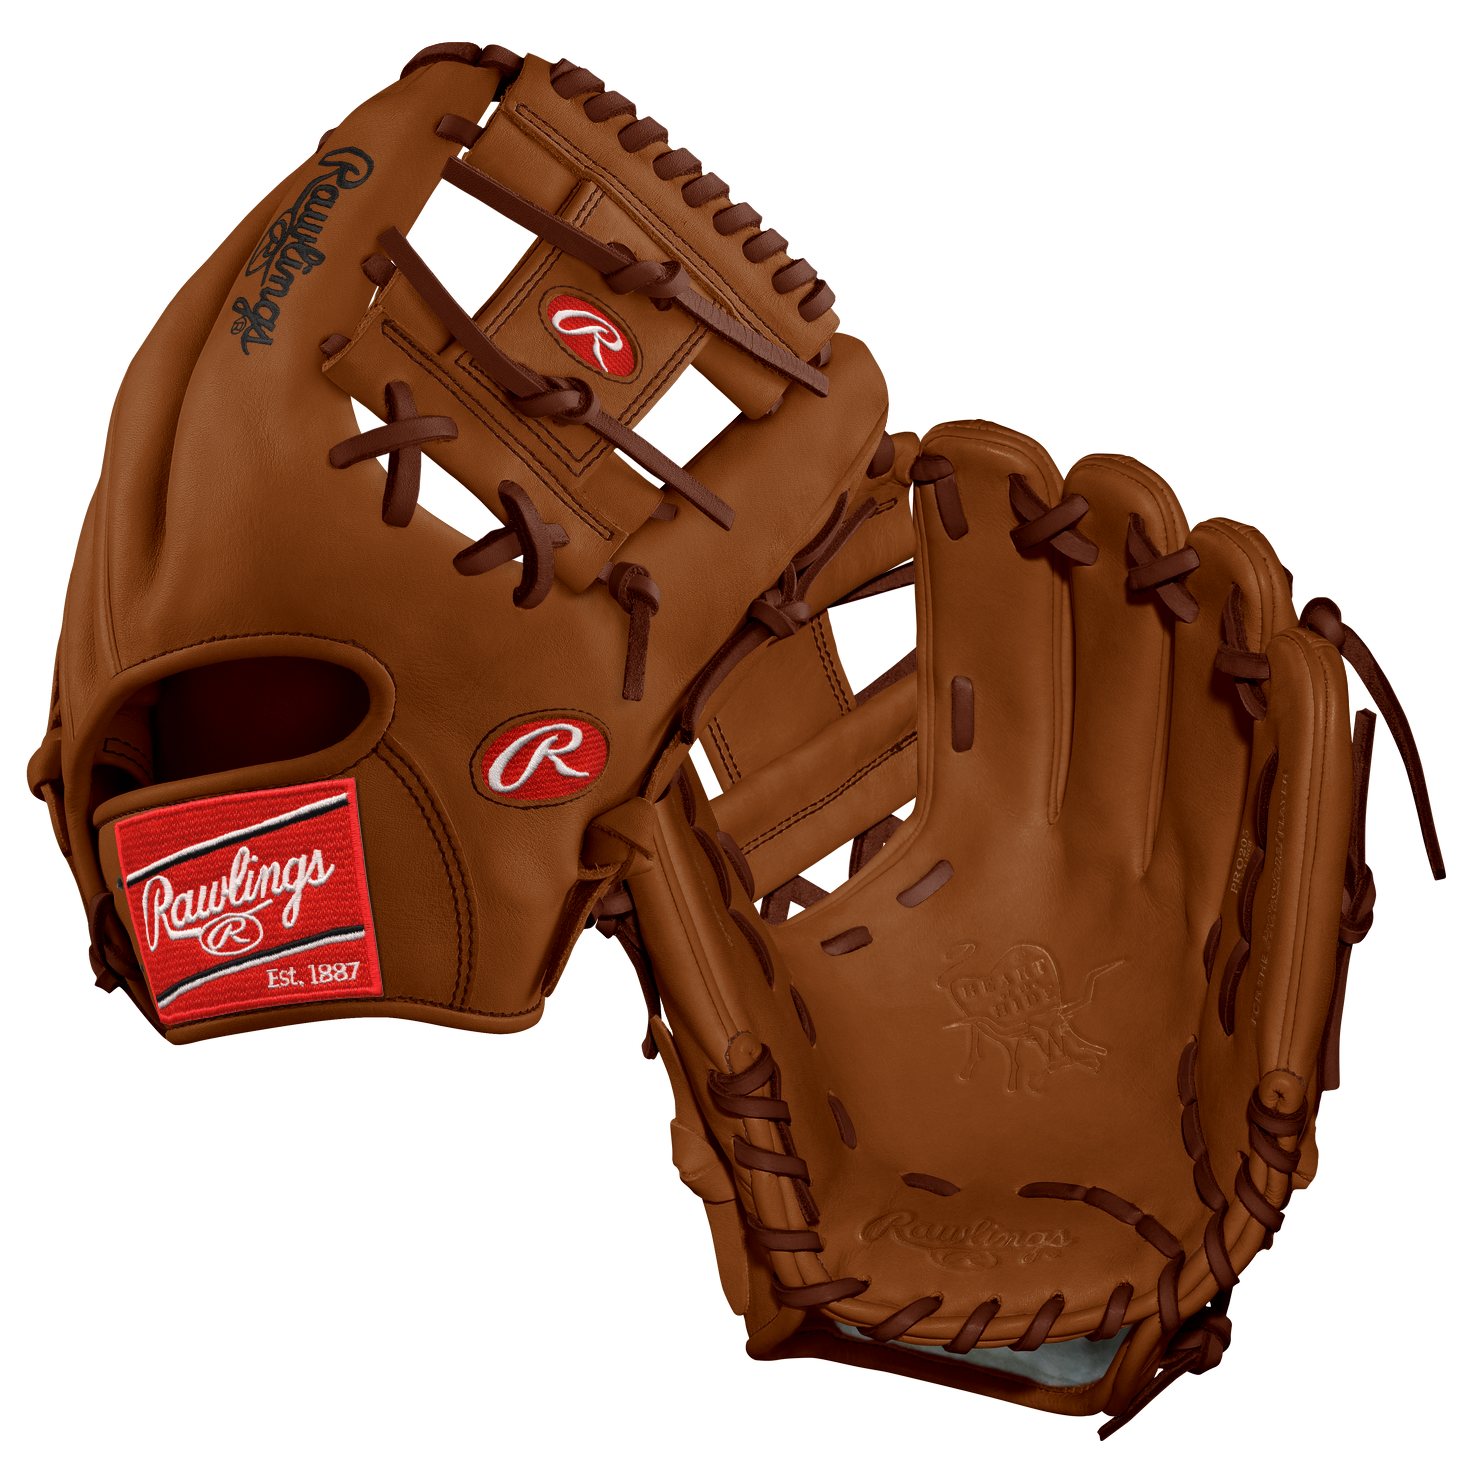       Rawlings Heart of the Hide baseball gloves are renowned for their exceptional craftsmanship and high-quality materials. Designed for professional players and serious enthusiasts alike, these gloves are meticulously crafted from top-grain steerhide leather, ensuring durability and a superior feel. With their comfortable fit and excellent break-in time, Heart of the Hide gloves provide a comfortable and secure baseball glove, enhancing fielding performance. Whether in the outfield, infield, or behind the plate, Rawlings Heart of the Hide gloves have earned a reputation as the go-to choice for players seeking top-tier performance and unmatched reliability. Experience the excellence of this Rawlings' Heart of the Hide glove, featuring the coveted 200 pattern with a deep pocket. Designed specifically for infielders seeking a slightly longer glove, this model measures 11.75 inches, providing optimal coverage. Crafted with the utmost attention to detail, it showcases Rawlings' stunning Timberglazed leather color, adding a touch of elegance to the field. Indulge in the perfect blend of style and functionality with this exceptional Rawlings Heart of the Hide glove.  Pattern 205 Sport Baseball Leather Heart of the Hide Fit Standard Throwing Hand Right-Hand Throw Position Infield Size 11 3/4 Web Pro I  Color Timberglaze Logo Patch White on Scarlet Leather Timberglaze Shell Palm Timberglaze Laces Timberglaze Lining Timberglaze Welting Palm Timberglaze Welting Back Timberglaze Binding Timberglaze Stitching Brown Stamping Indent Heel Pad Full Wrist Lining Thermo Formed Break-In Standard       